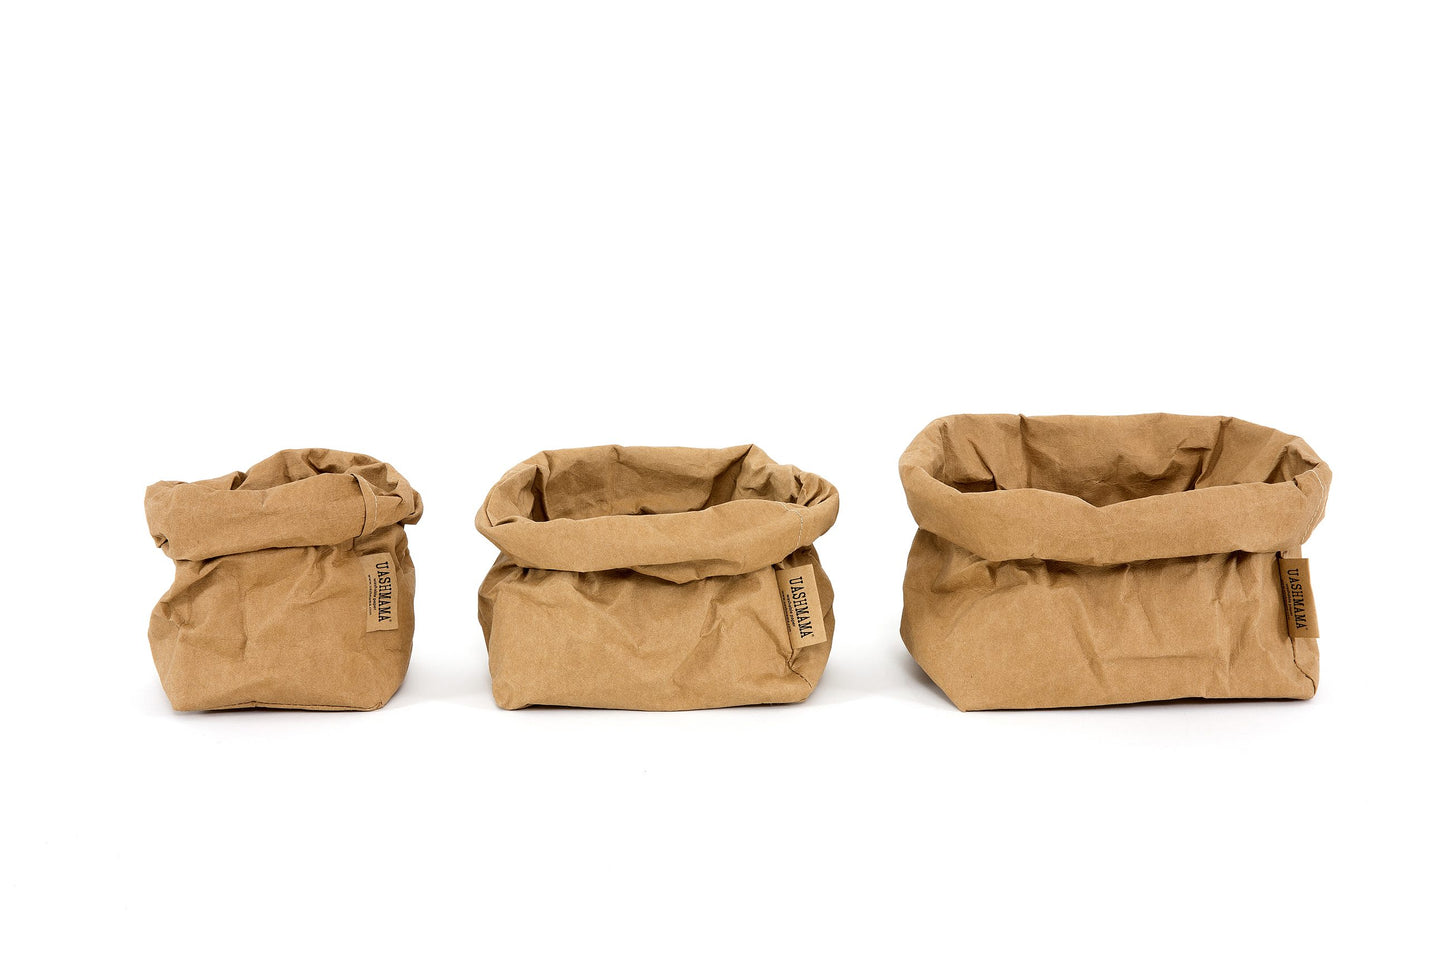 A small, medium and large washable paper bag in a tan colour are lined up from smallest to largest.